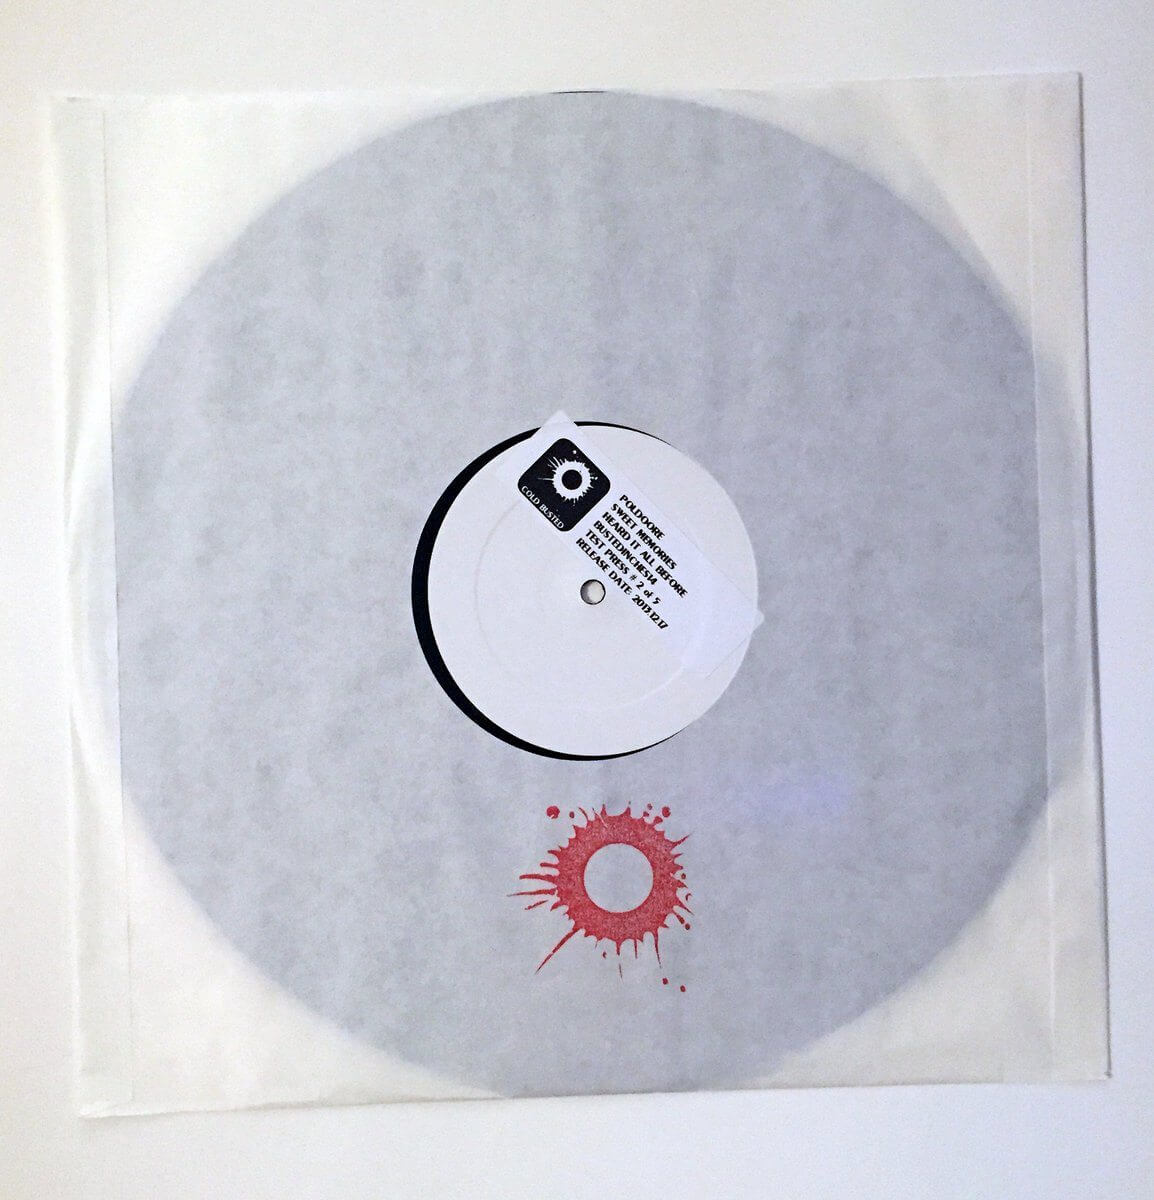 Poldoore - Sweet Memories - Limited Edition 12 Inch Vinyl Test Pressing - Cold Busted